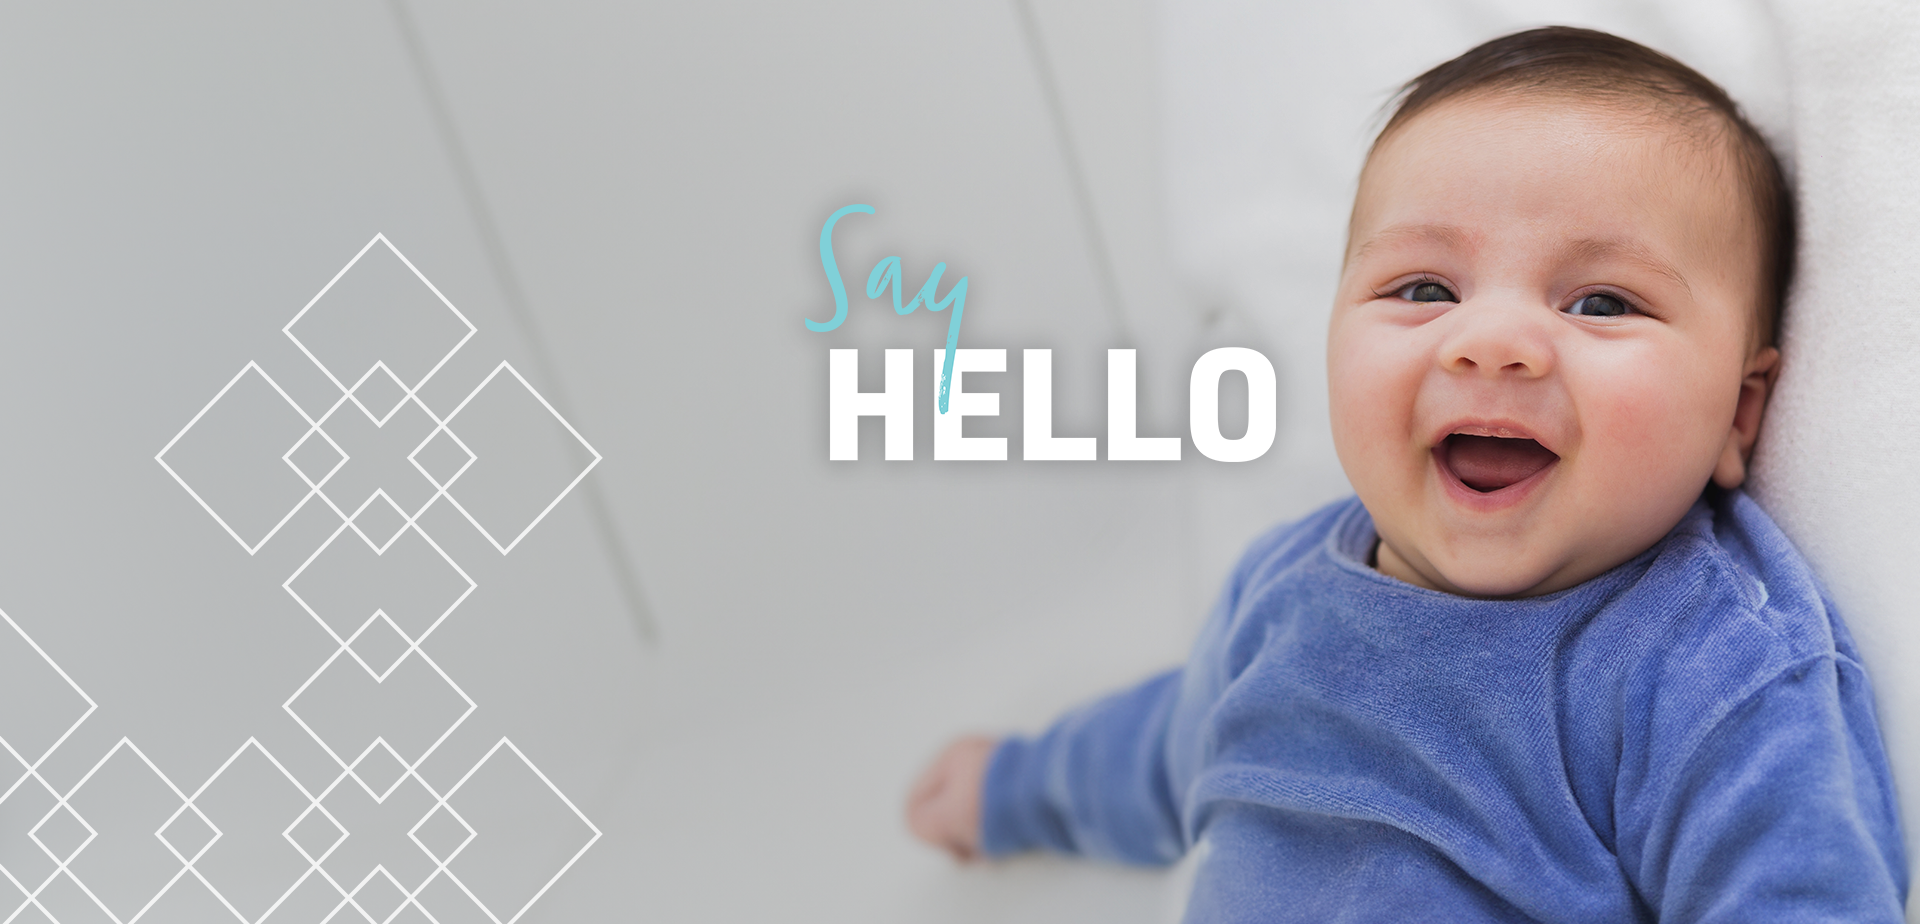 Baby smiling with text "say hello"